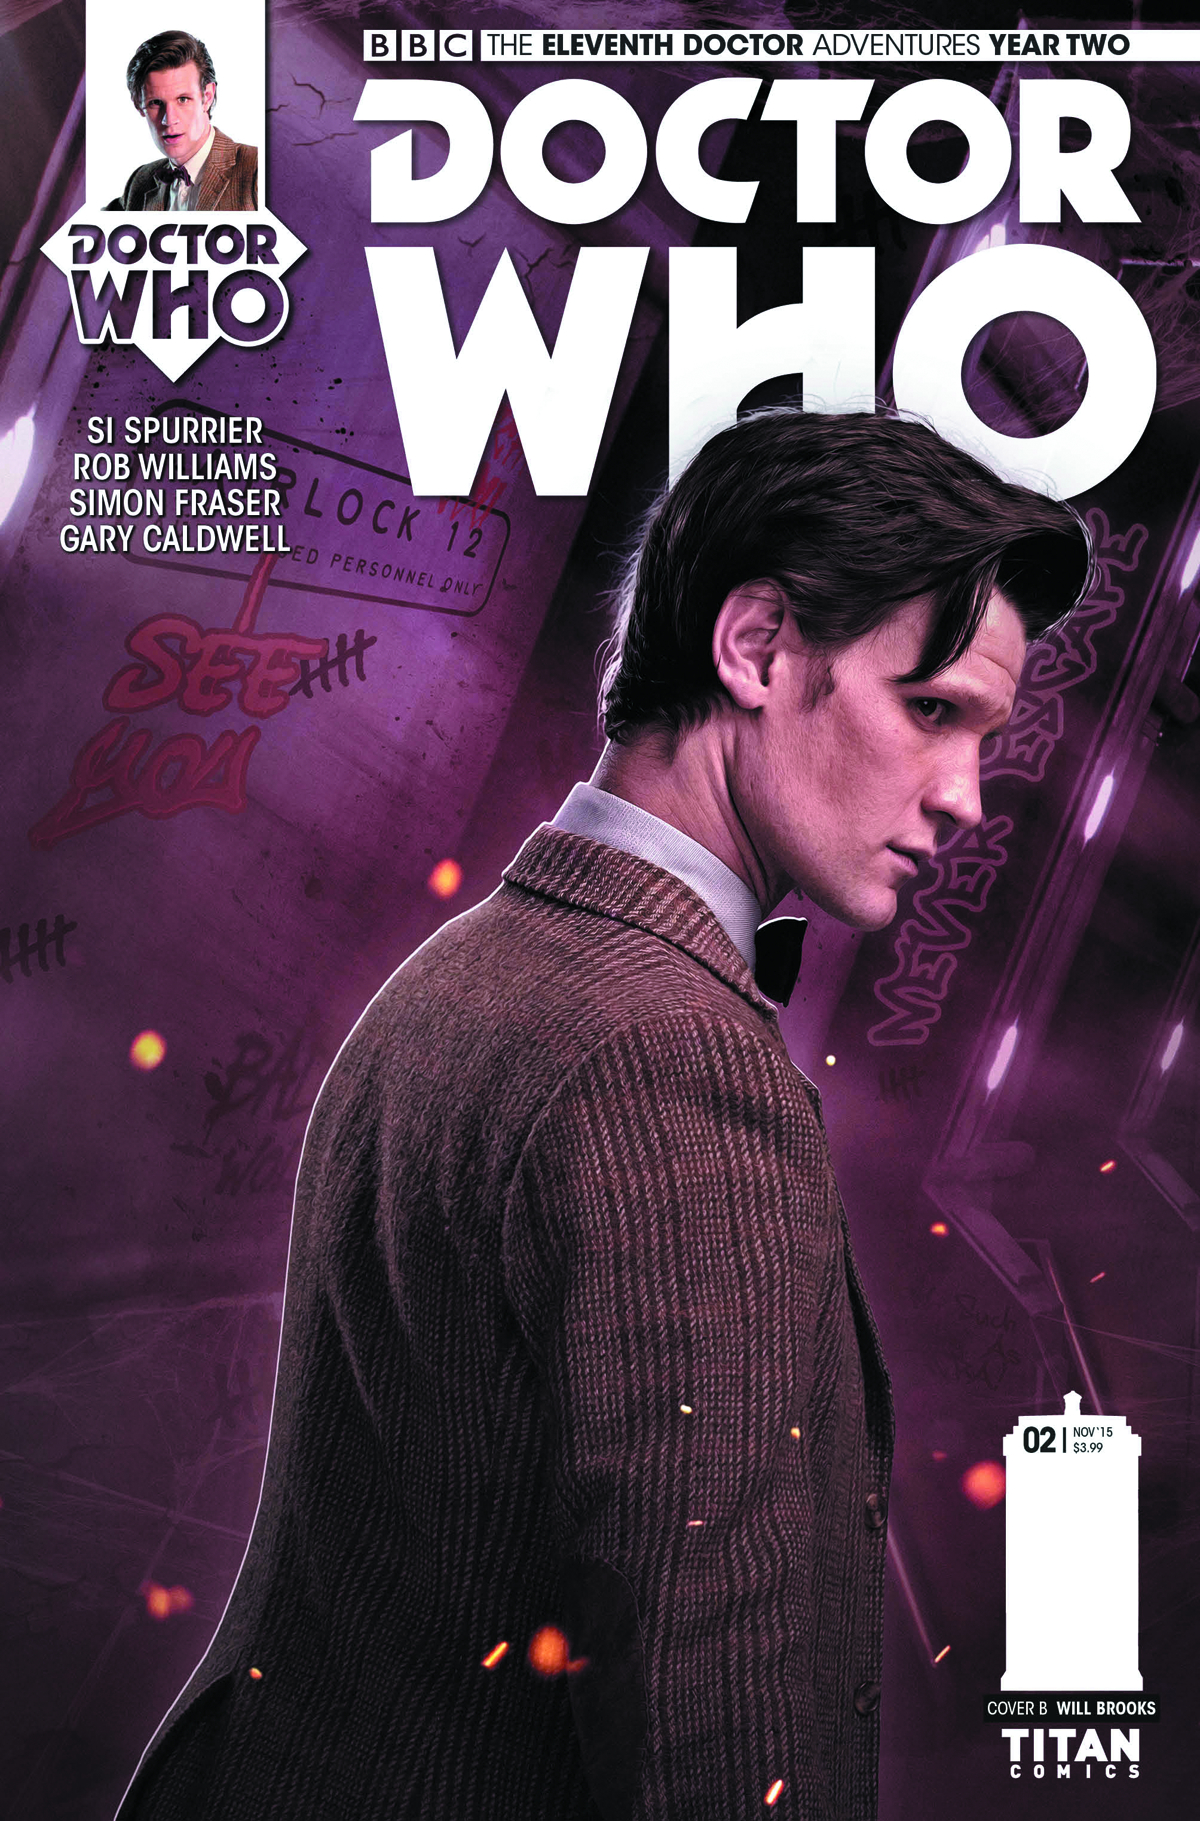 DOCTOR WHO 11TH YEAR TWO #3 SUBSCRIPTION PHOTO